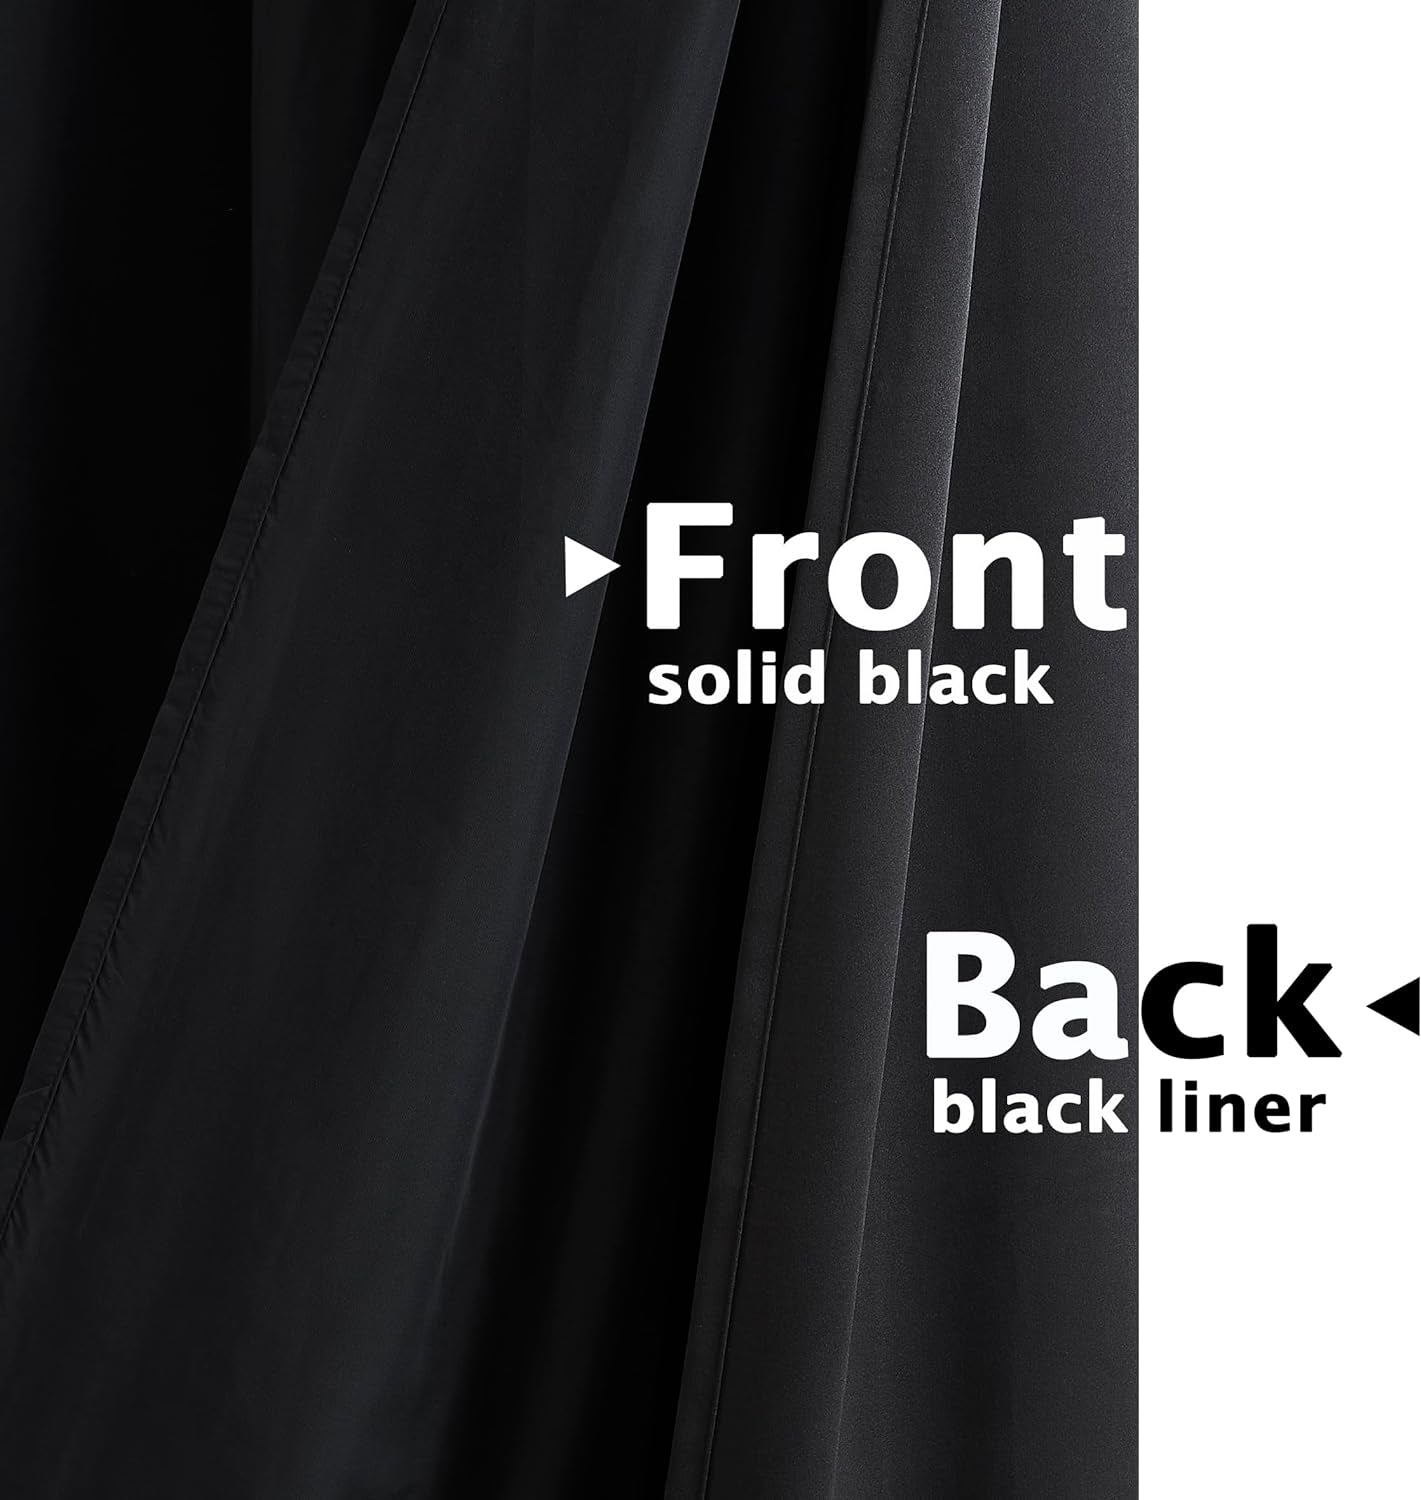 Mix and Match Blackout Curtains - Bedroom Solid Black Full Blackout Window Panels & Black Chiffon Sheer Curtains Thermal Insulated Drapes for Living Room, Grommet, 52" W X 63" L, Set of 4  Purainbow   